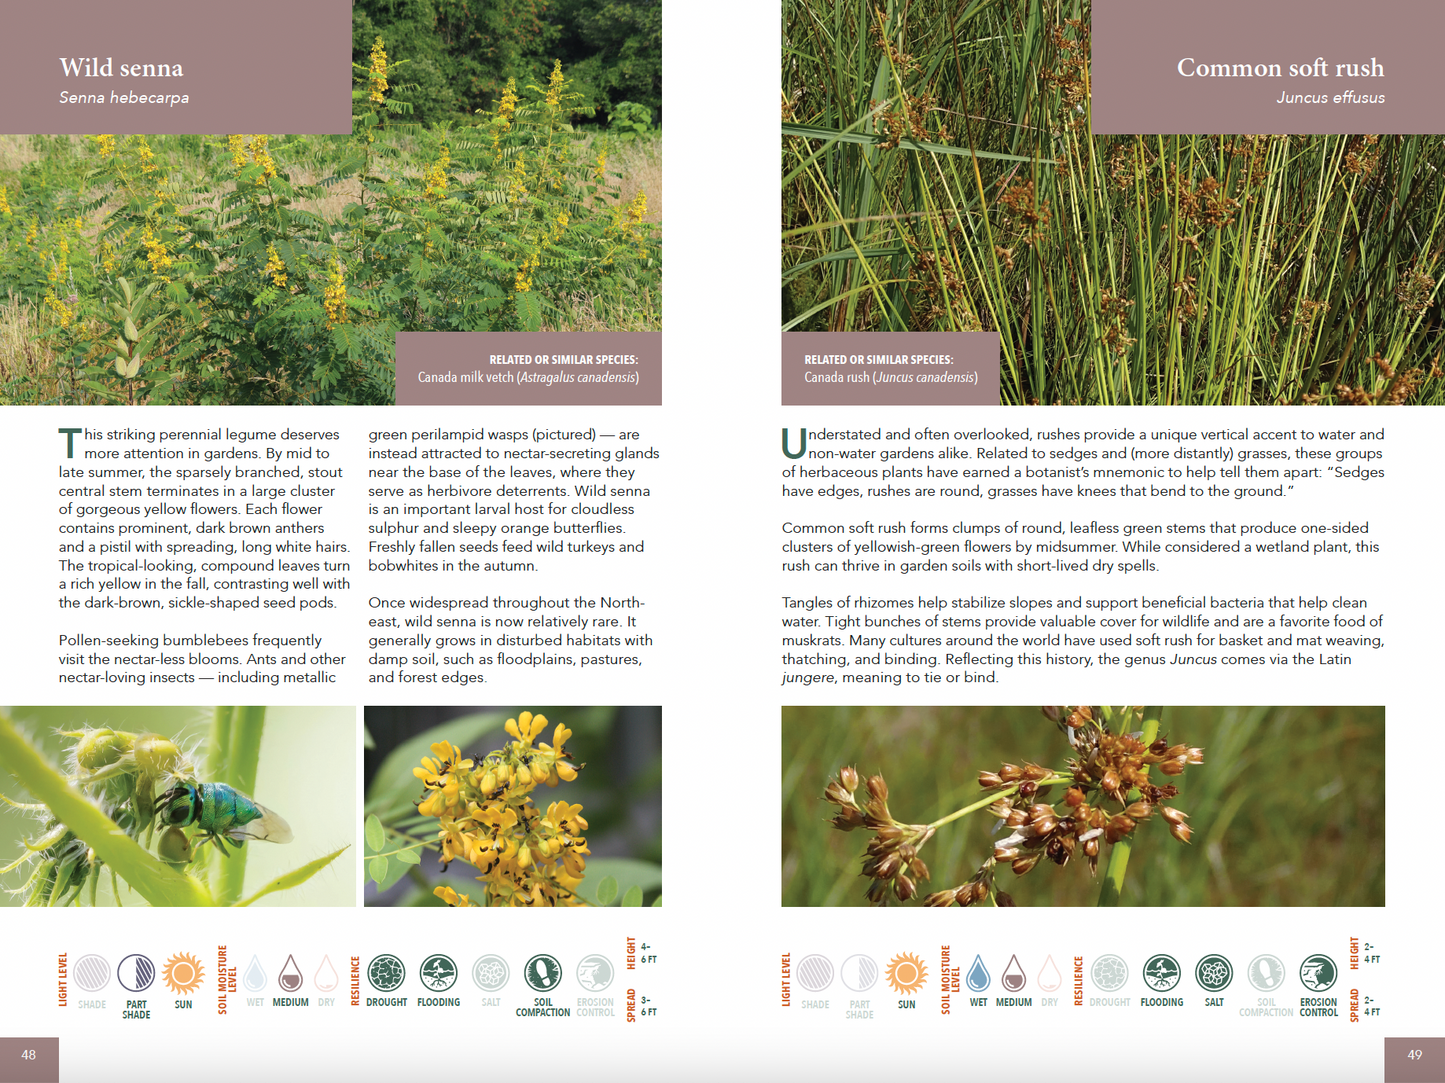 Planting for Climate Resilience in Northeast Landscapes: A Wild Seed Project Guide